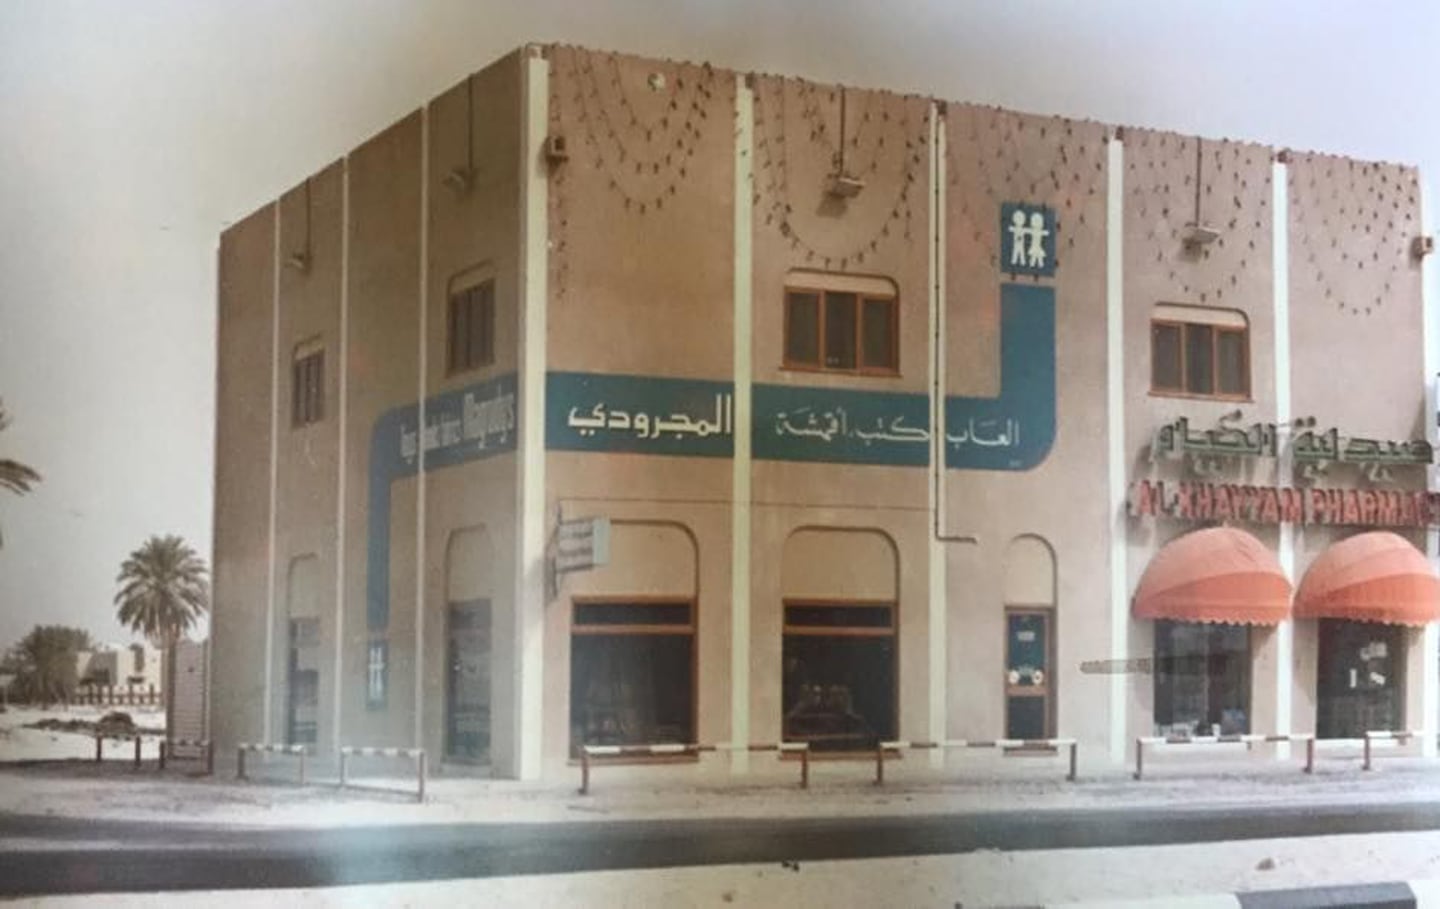 Magrudy's first launched in Jumeirah, Dubai in 1975. Photo: Magrudy's